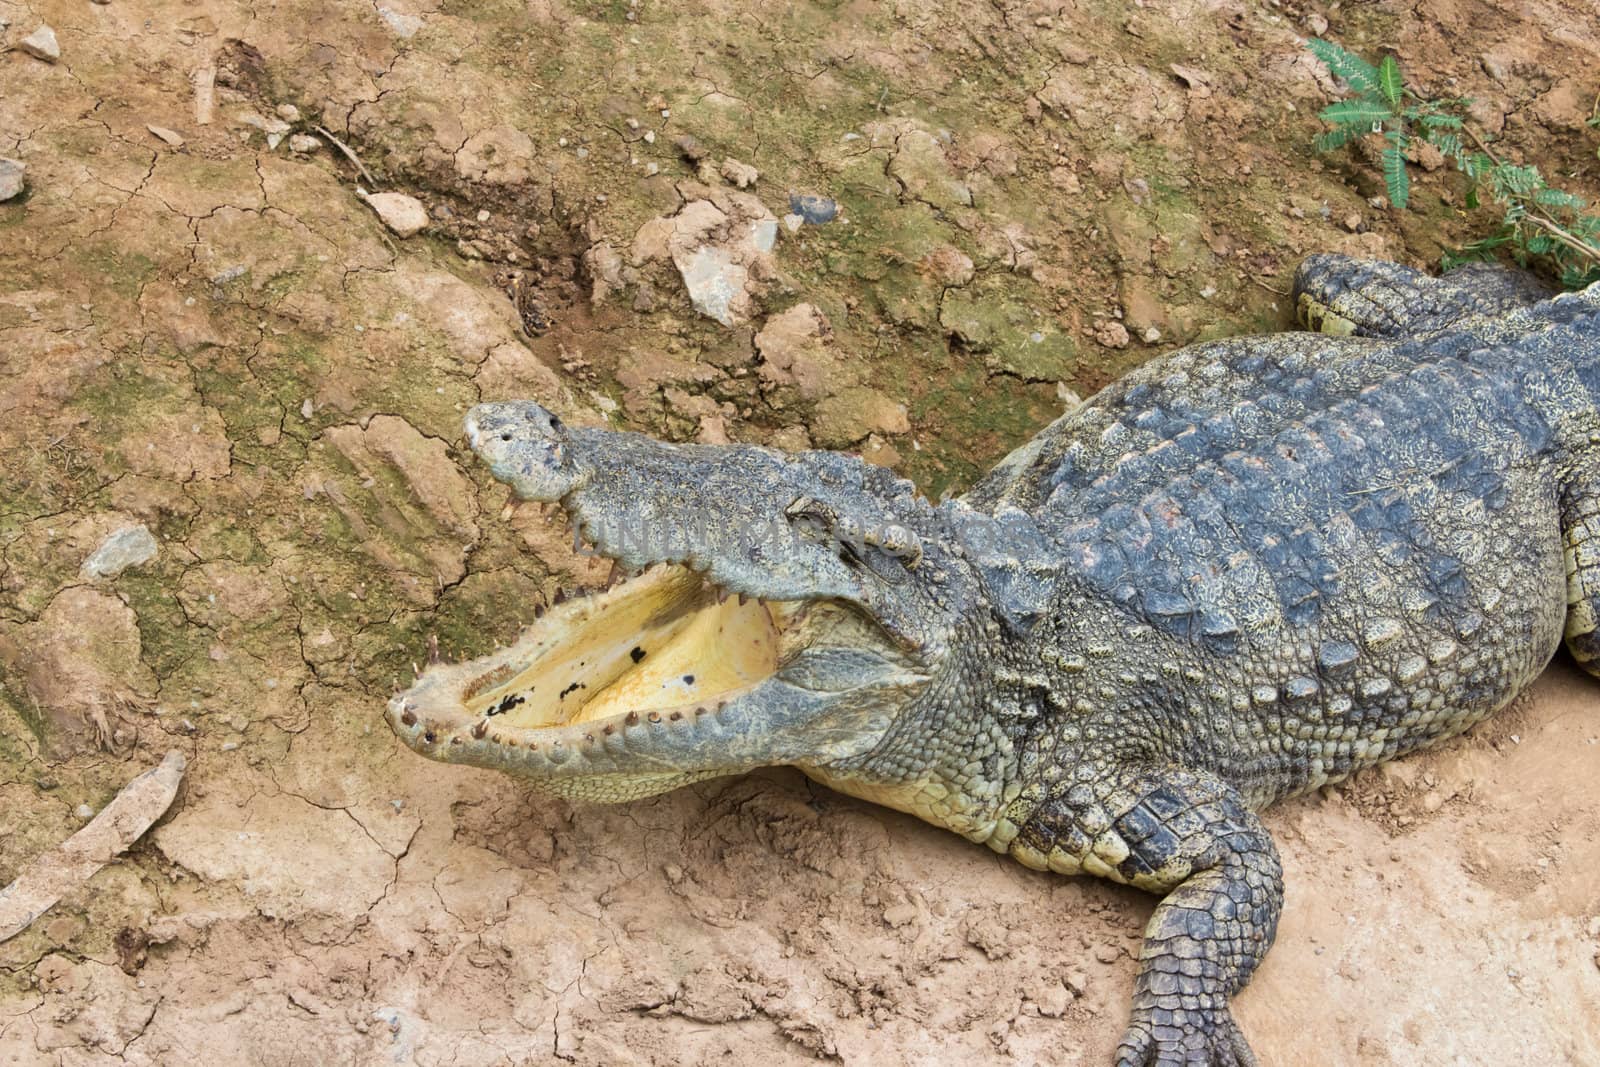 A closeup photo of a crocodile with open jaws